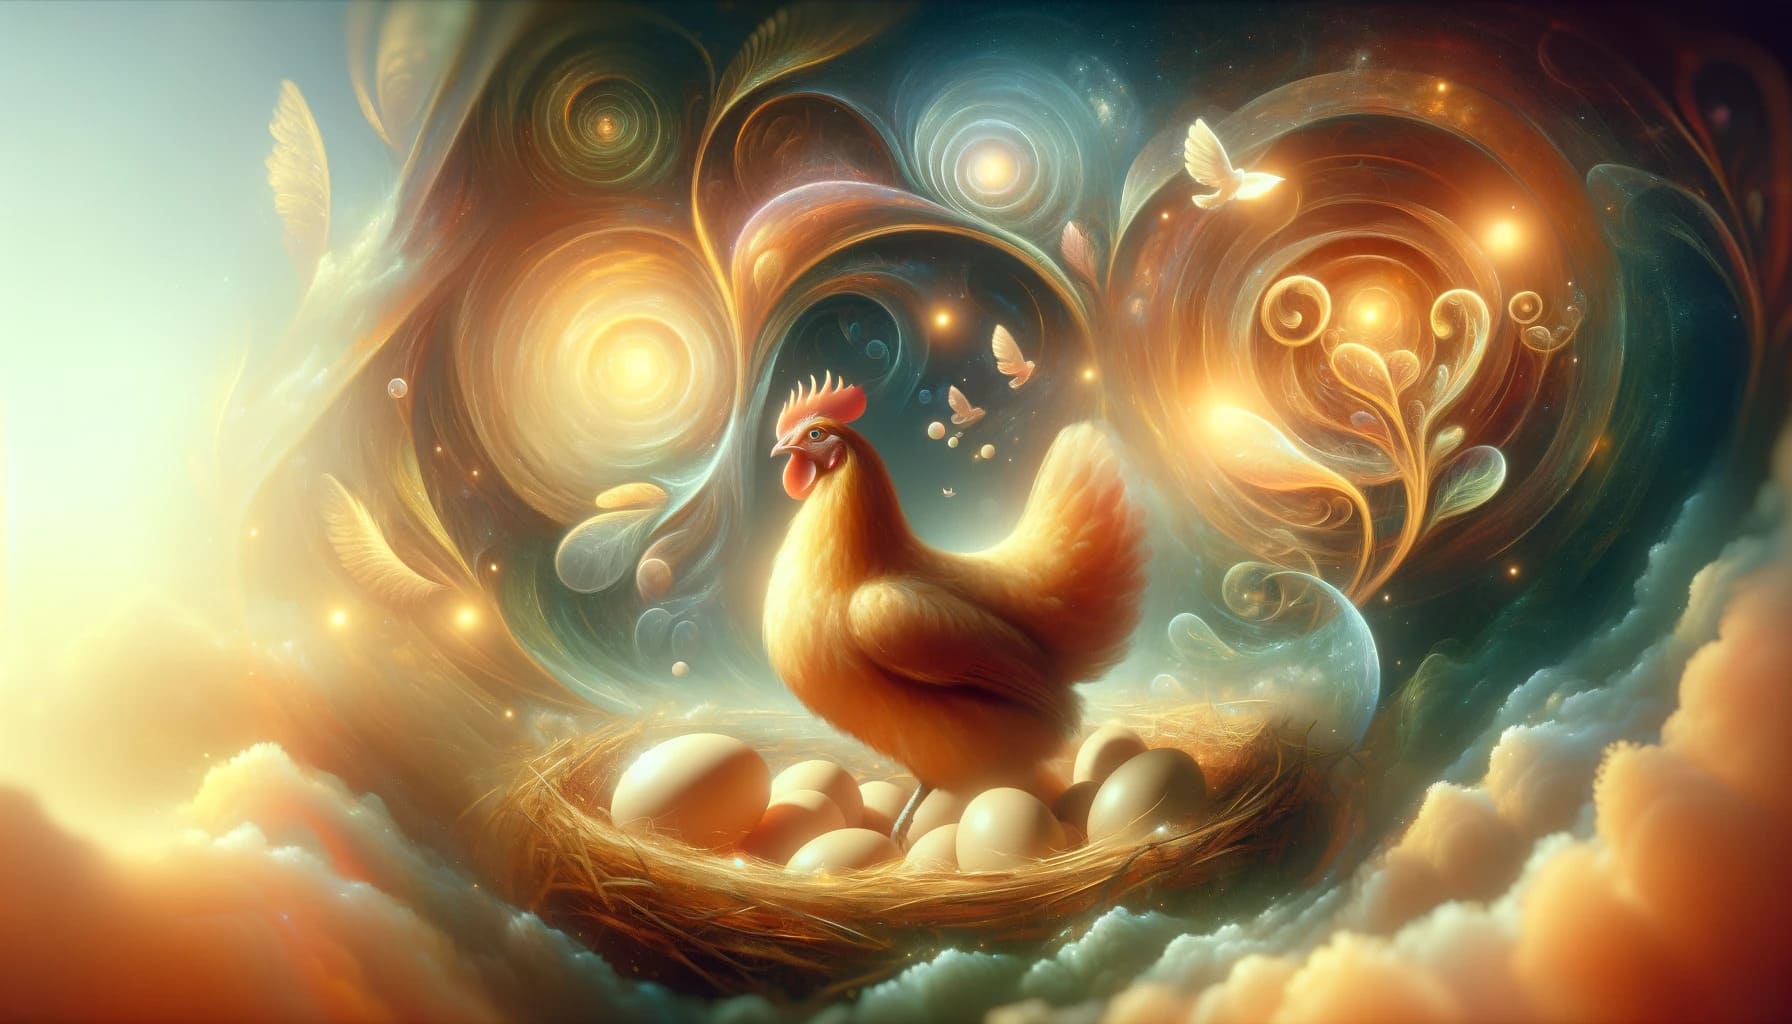 DALL·E 2023 11 09 10.23.11 A dreamlike surreal image depicting the symbolism of a hen as it resonates with themes of fertility motherhood and protection. The scene is set in